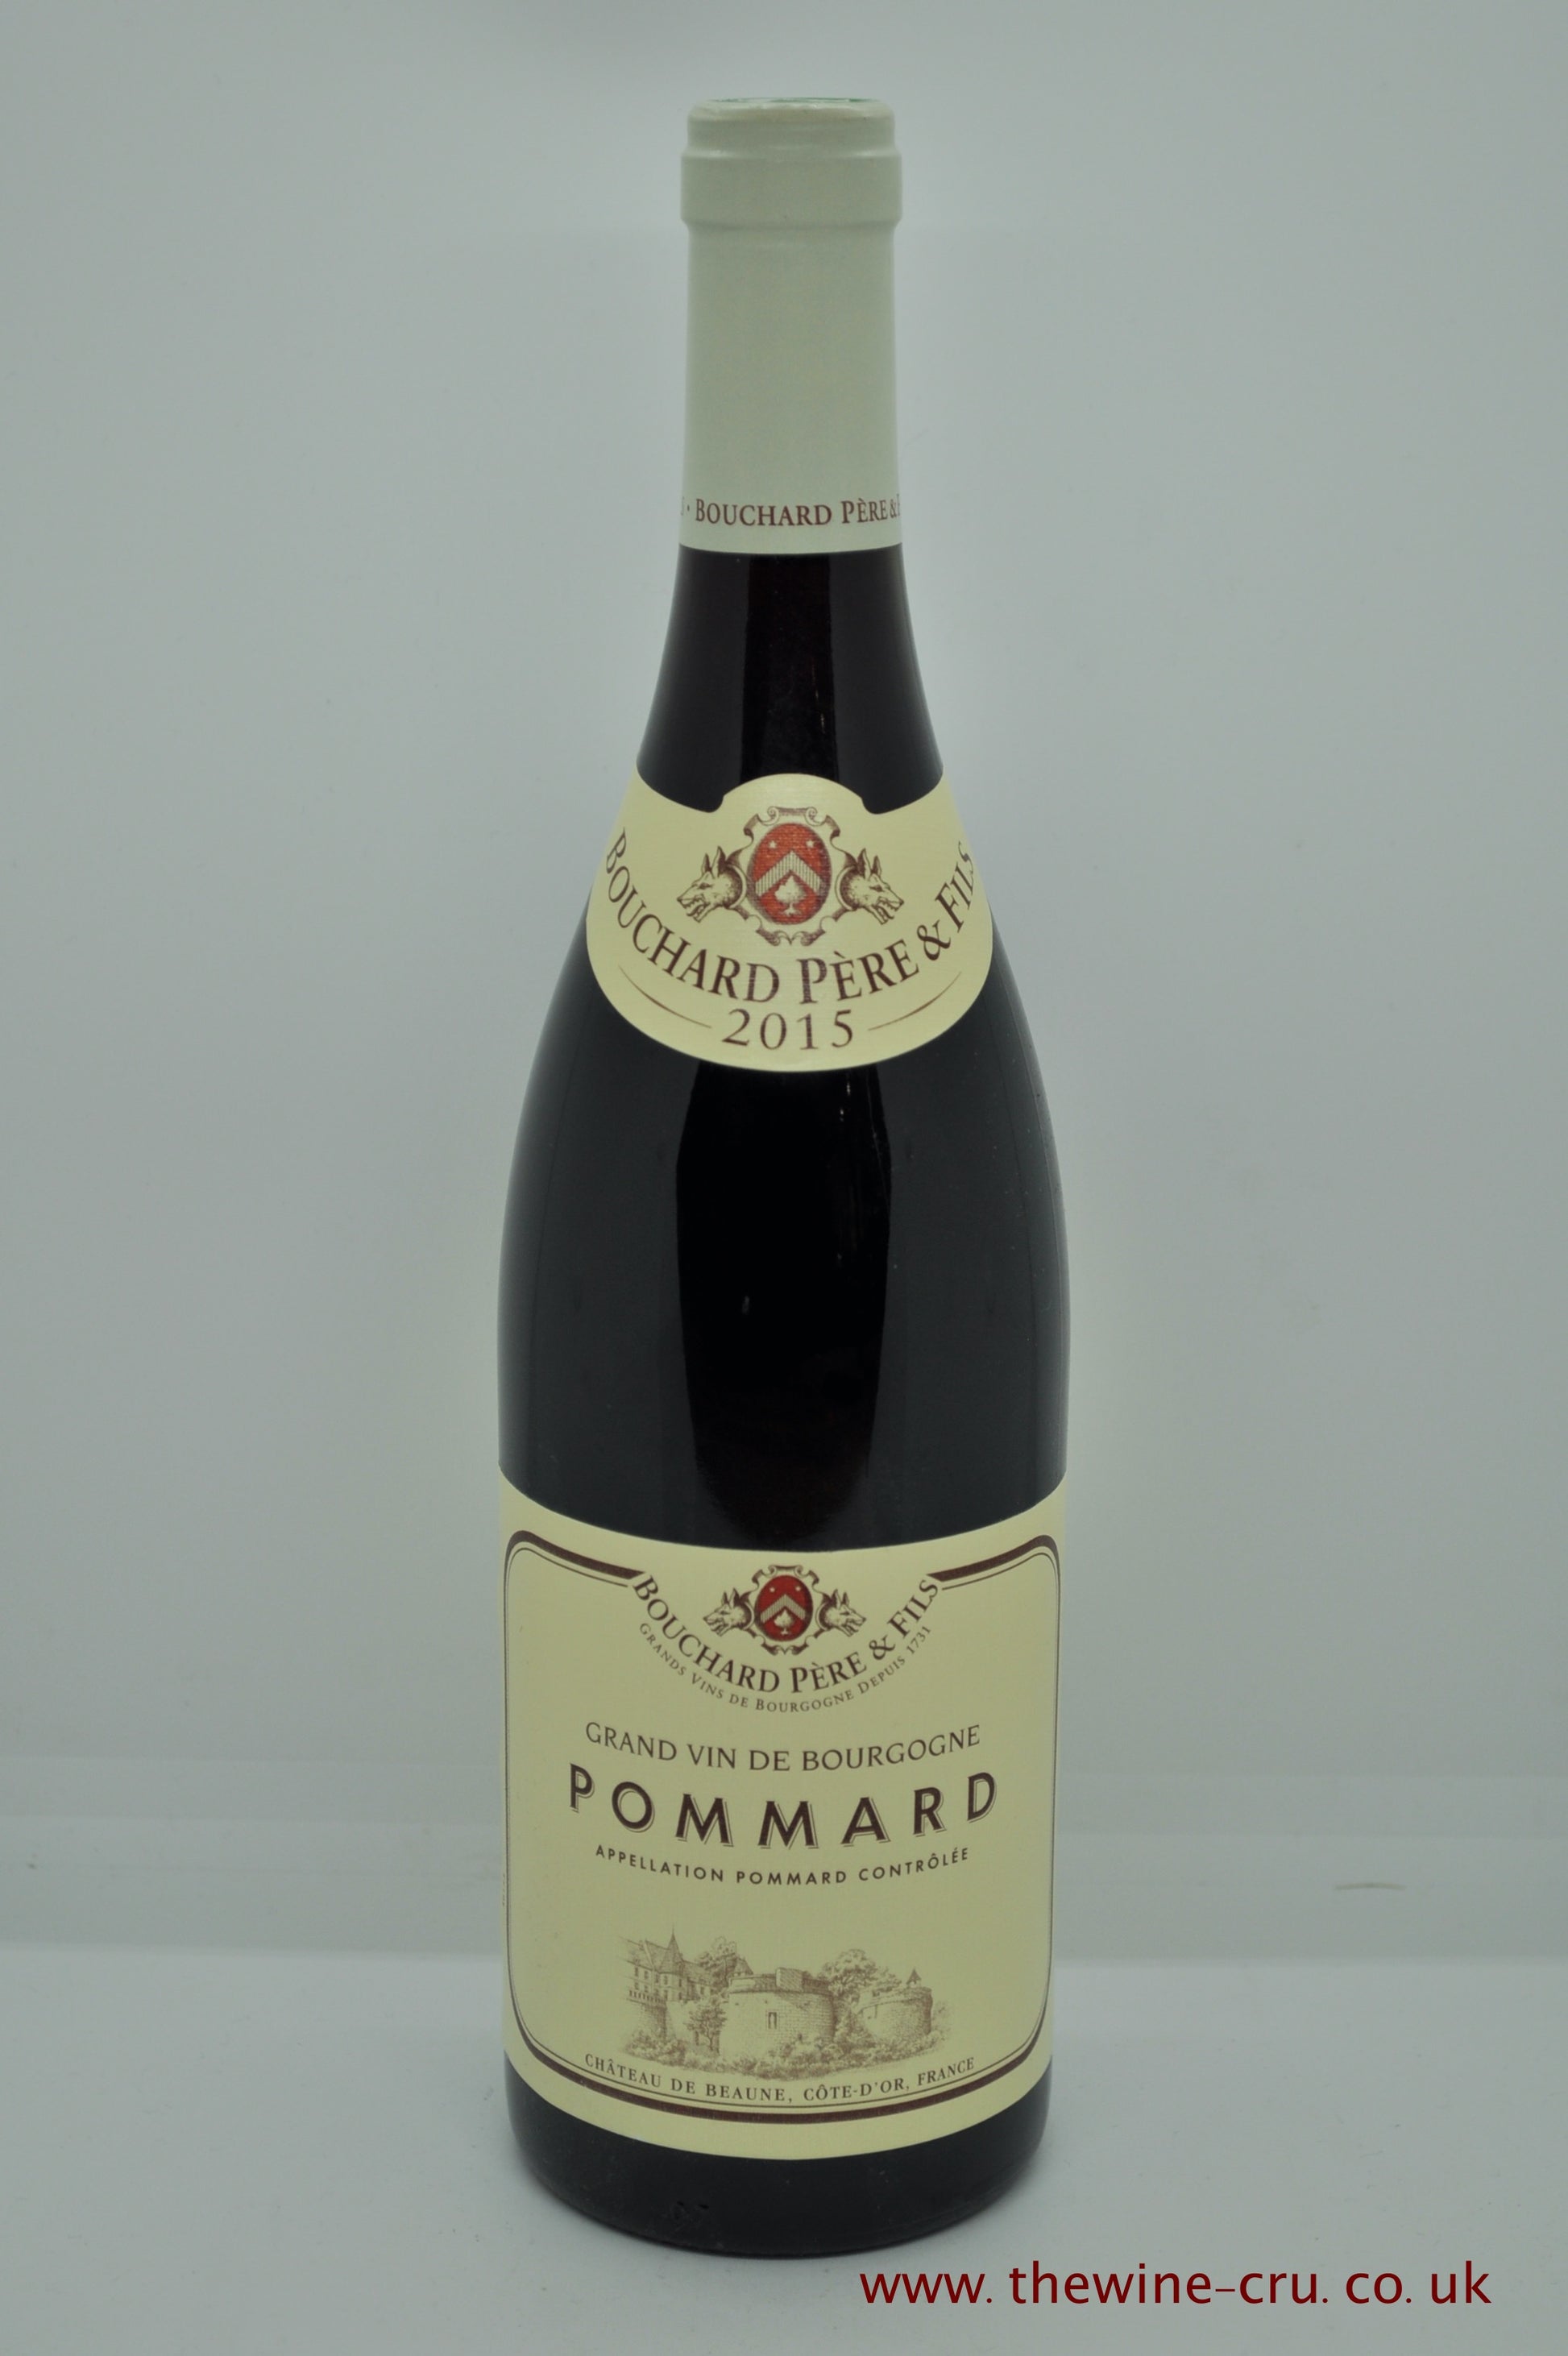 2015 vintage red wine. Pommard, Bouchard Pere et Fils 2015 Burgundy France. Immediate delivery. Free local delivery. Gift wrapping available.